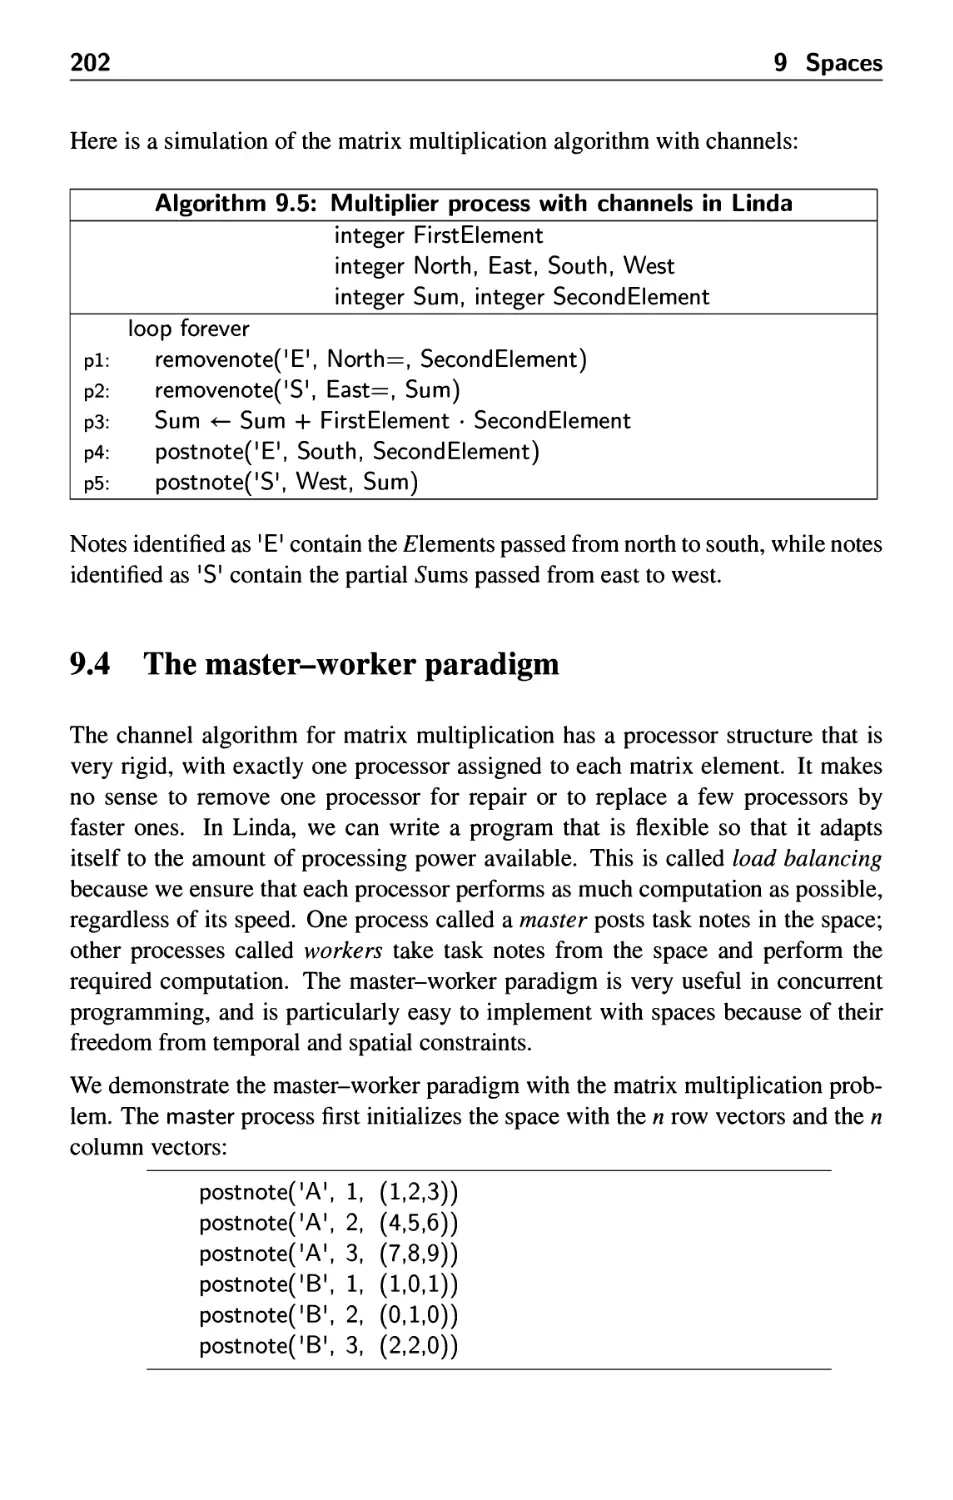 9.4 The master-worker paradigm